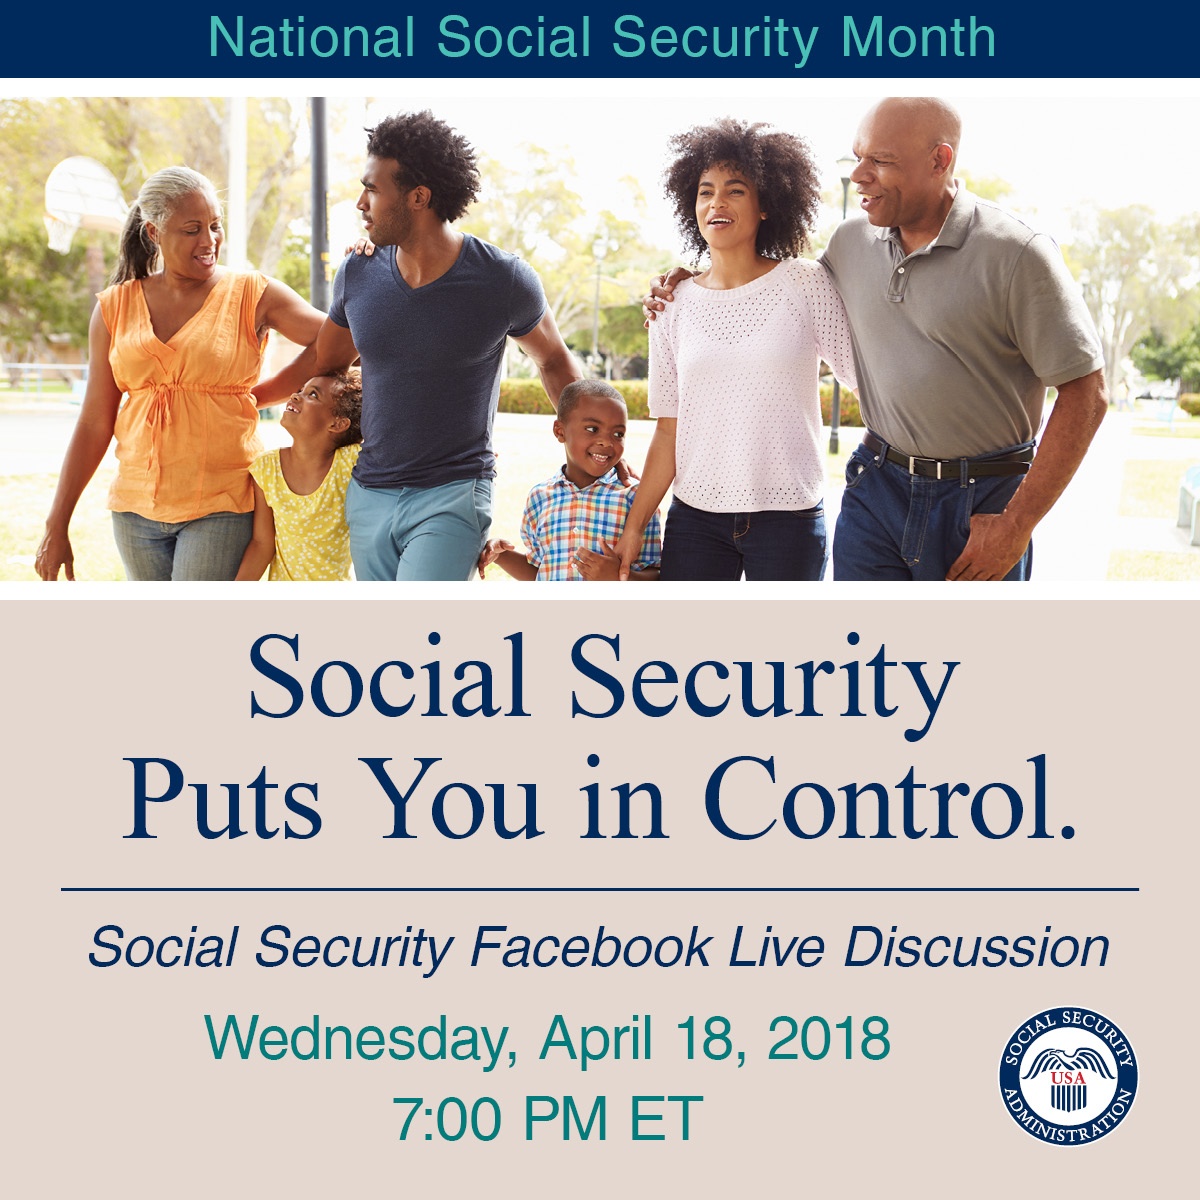 Image of family. Text: Social Security Puts You In Control. Social Security Facebook Live Discussion. Wednesday, April 18, 2018 7:00 PM ET